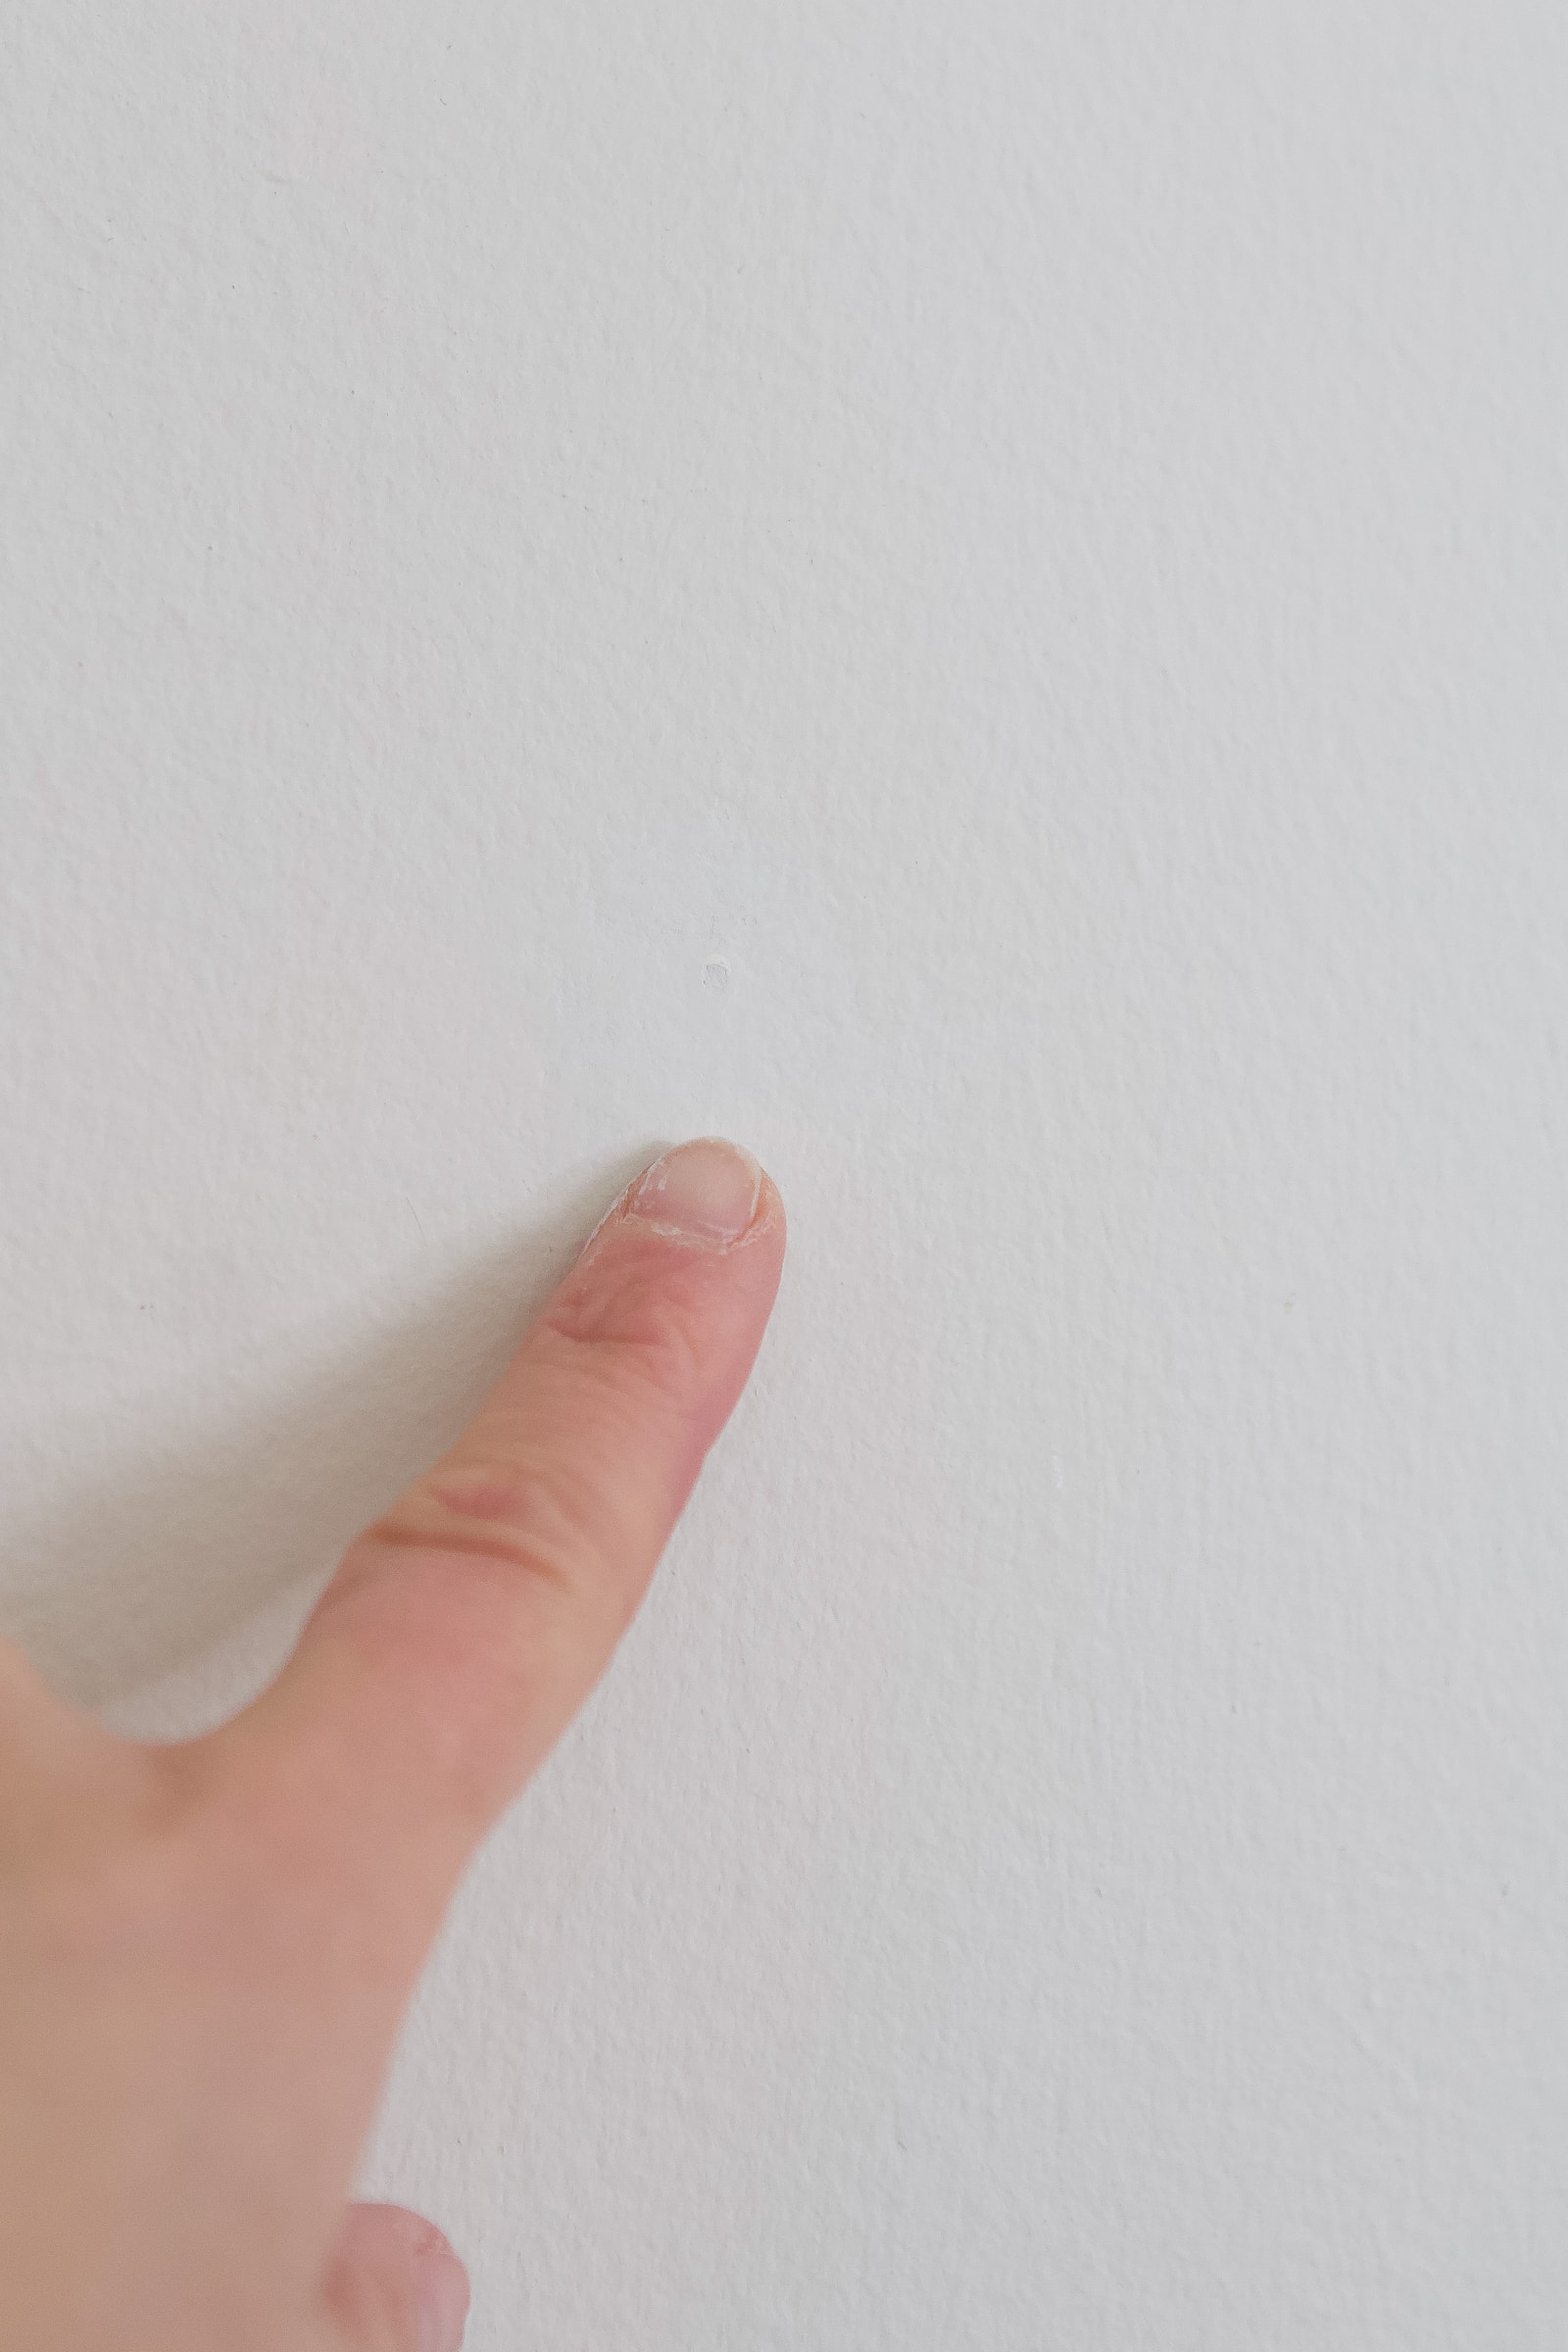 How to fill nail holes in drywall